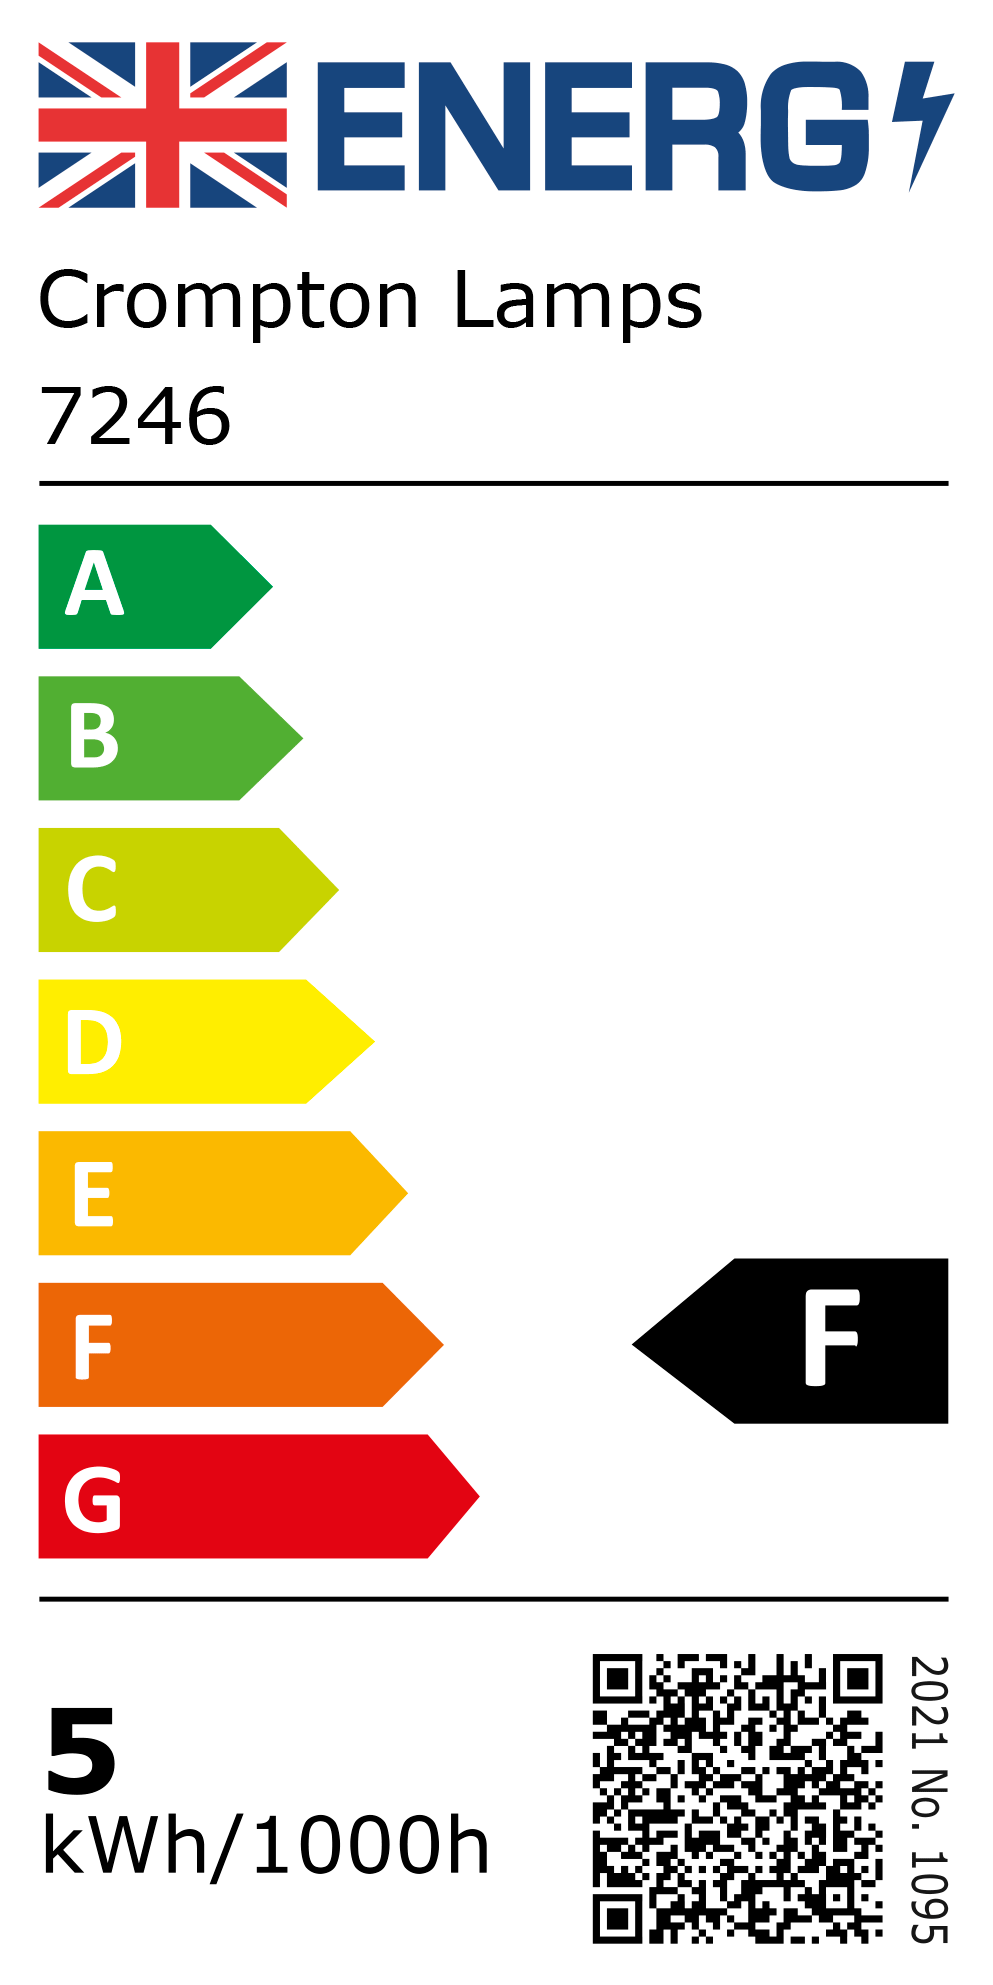 New 2021 Energy Rating Label: Stock Code 7246